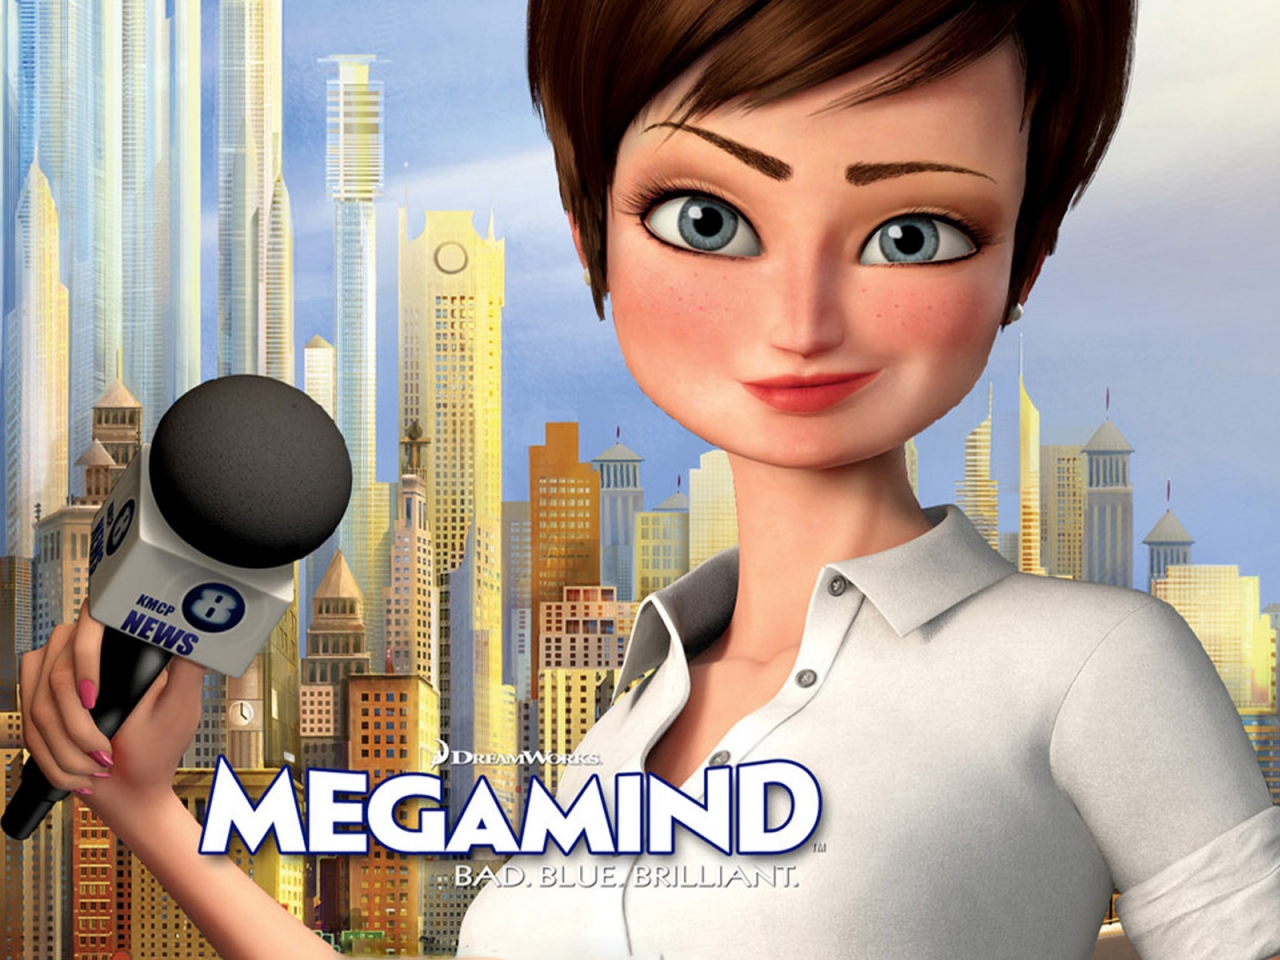 Megamind Roxanne Ritchie for 1280 x 960 resolution